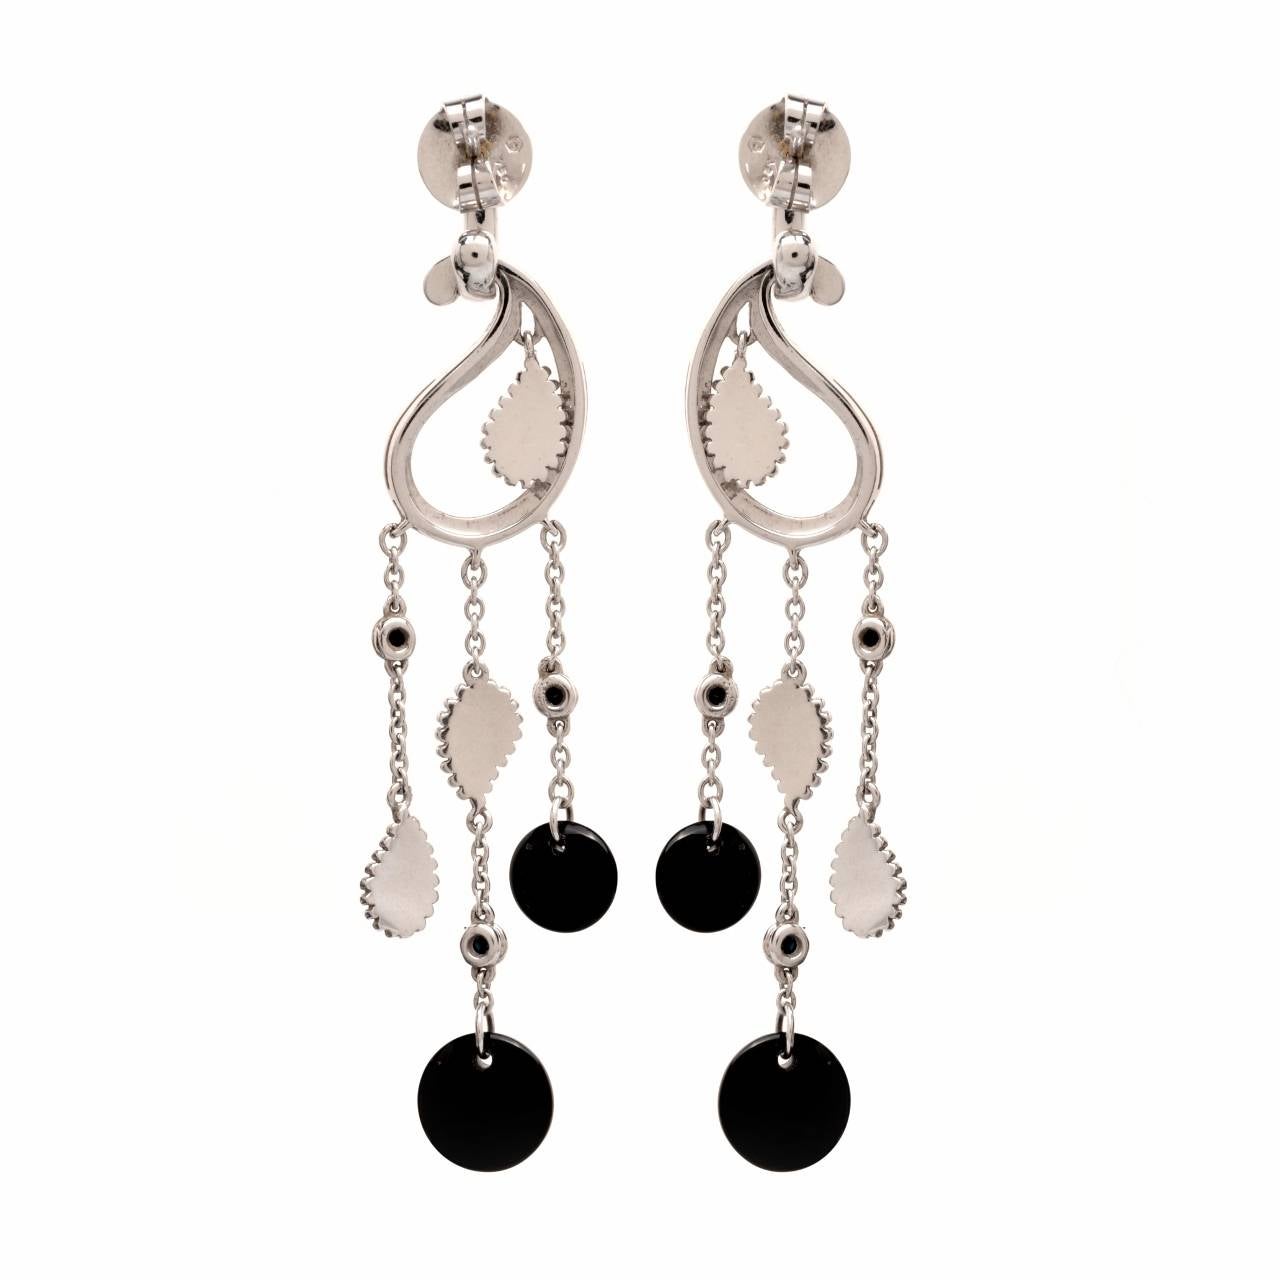 These lovely, 100% Original Carrera y Carrera drop earrings are crafted in solid 18K white gold. These earrings are accented with some 6 genuine bezel set black diamonds approx 0.30cttw and feature 4 genuine round Onyx approx 8mm-10mm in diameter.